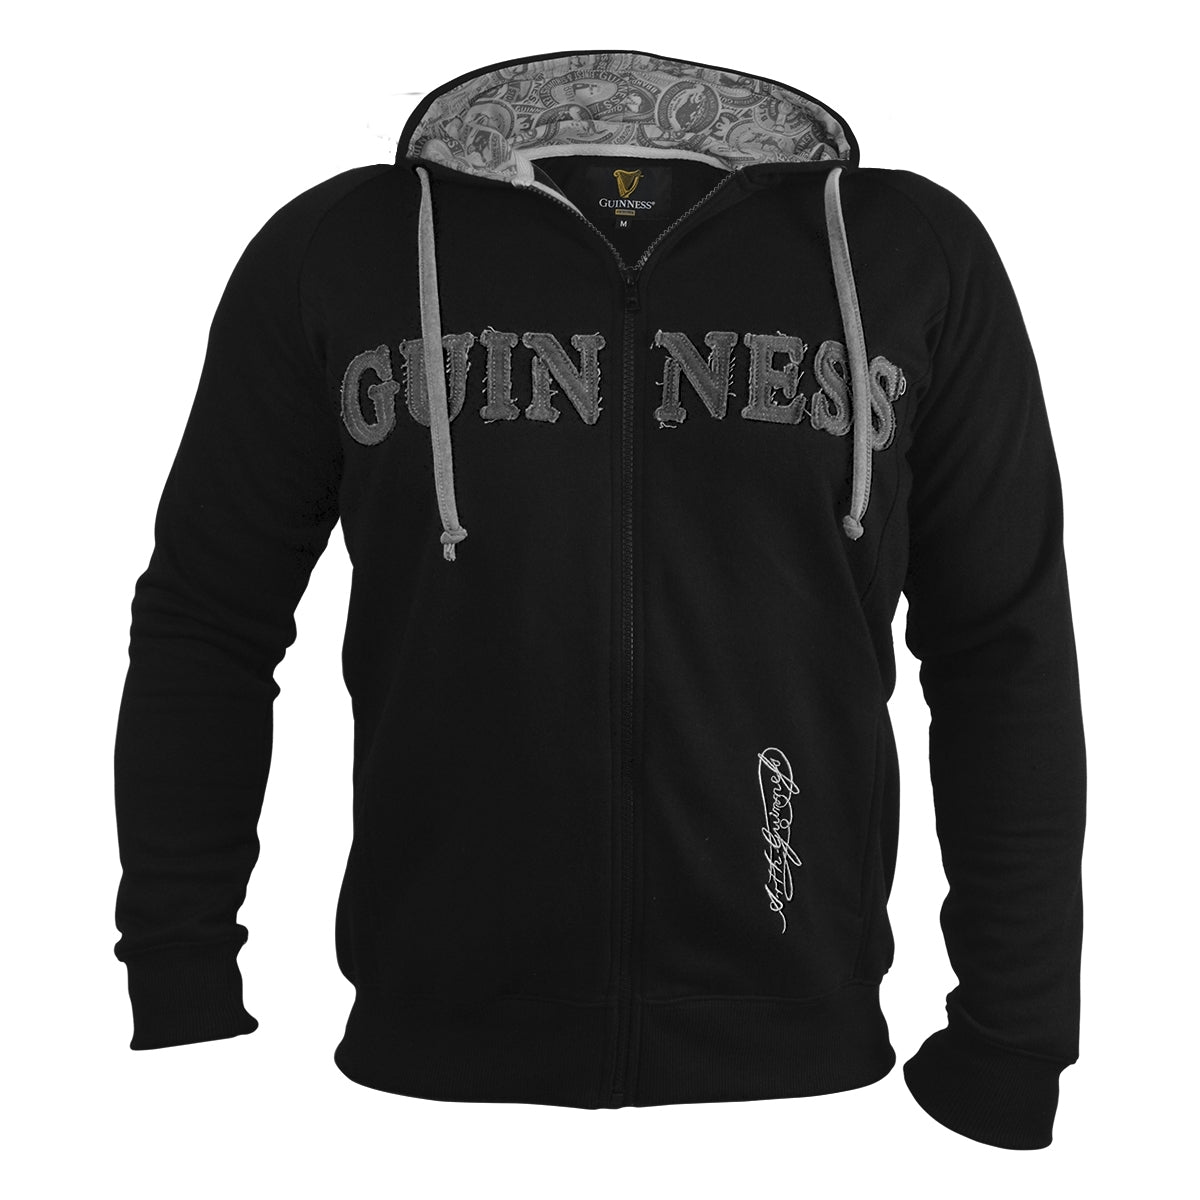 A stylish Guinness Vintage Black & Grey Label Lined Hoodie displaying the iconic word "Guinness" on the front.